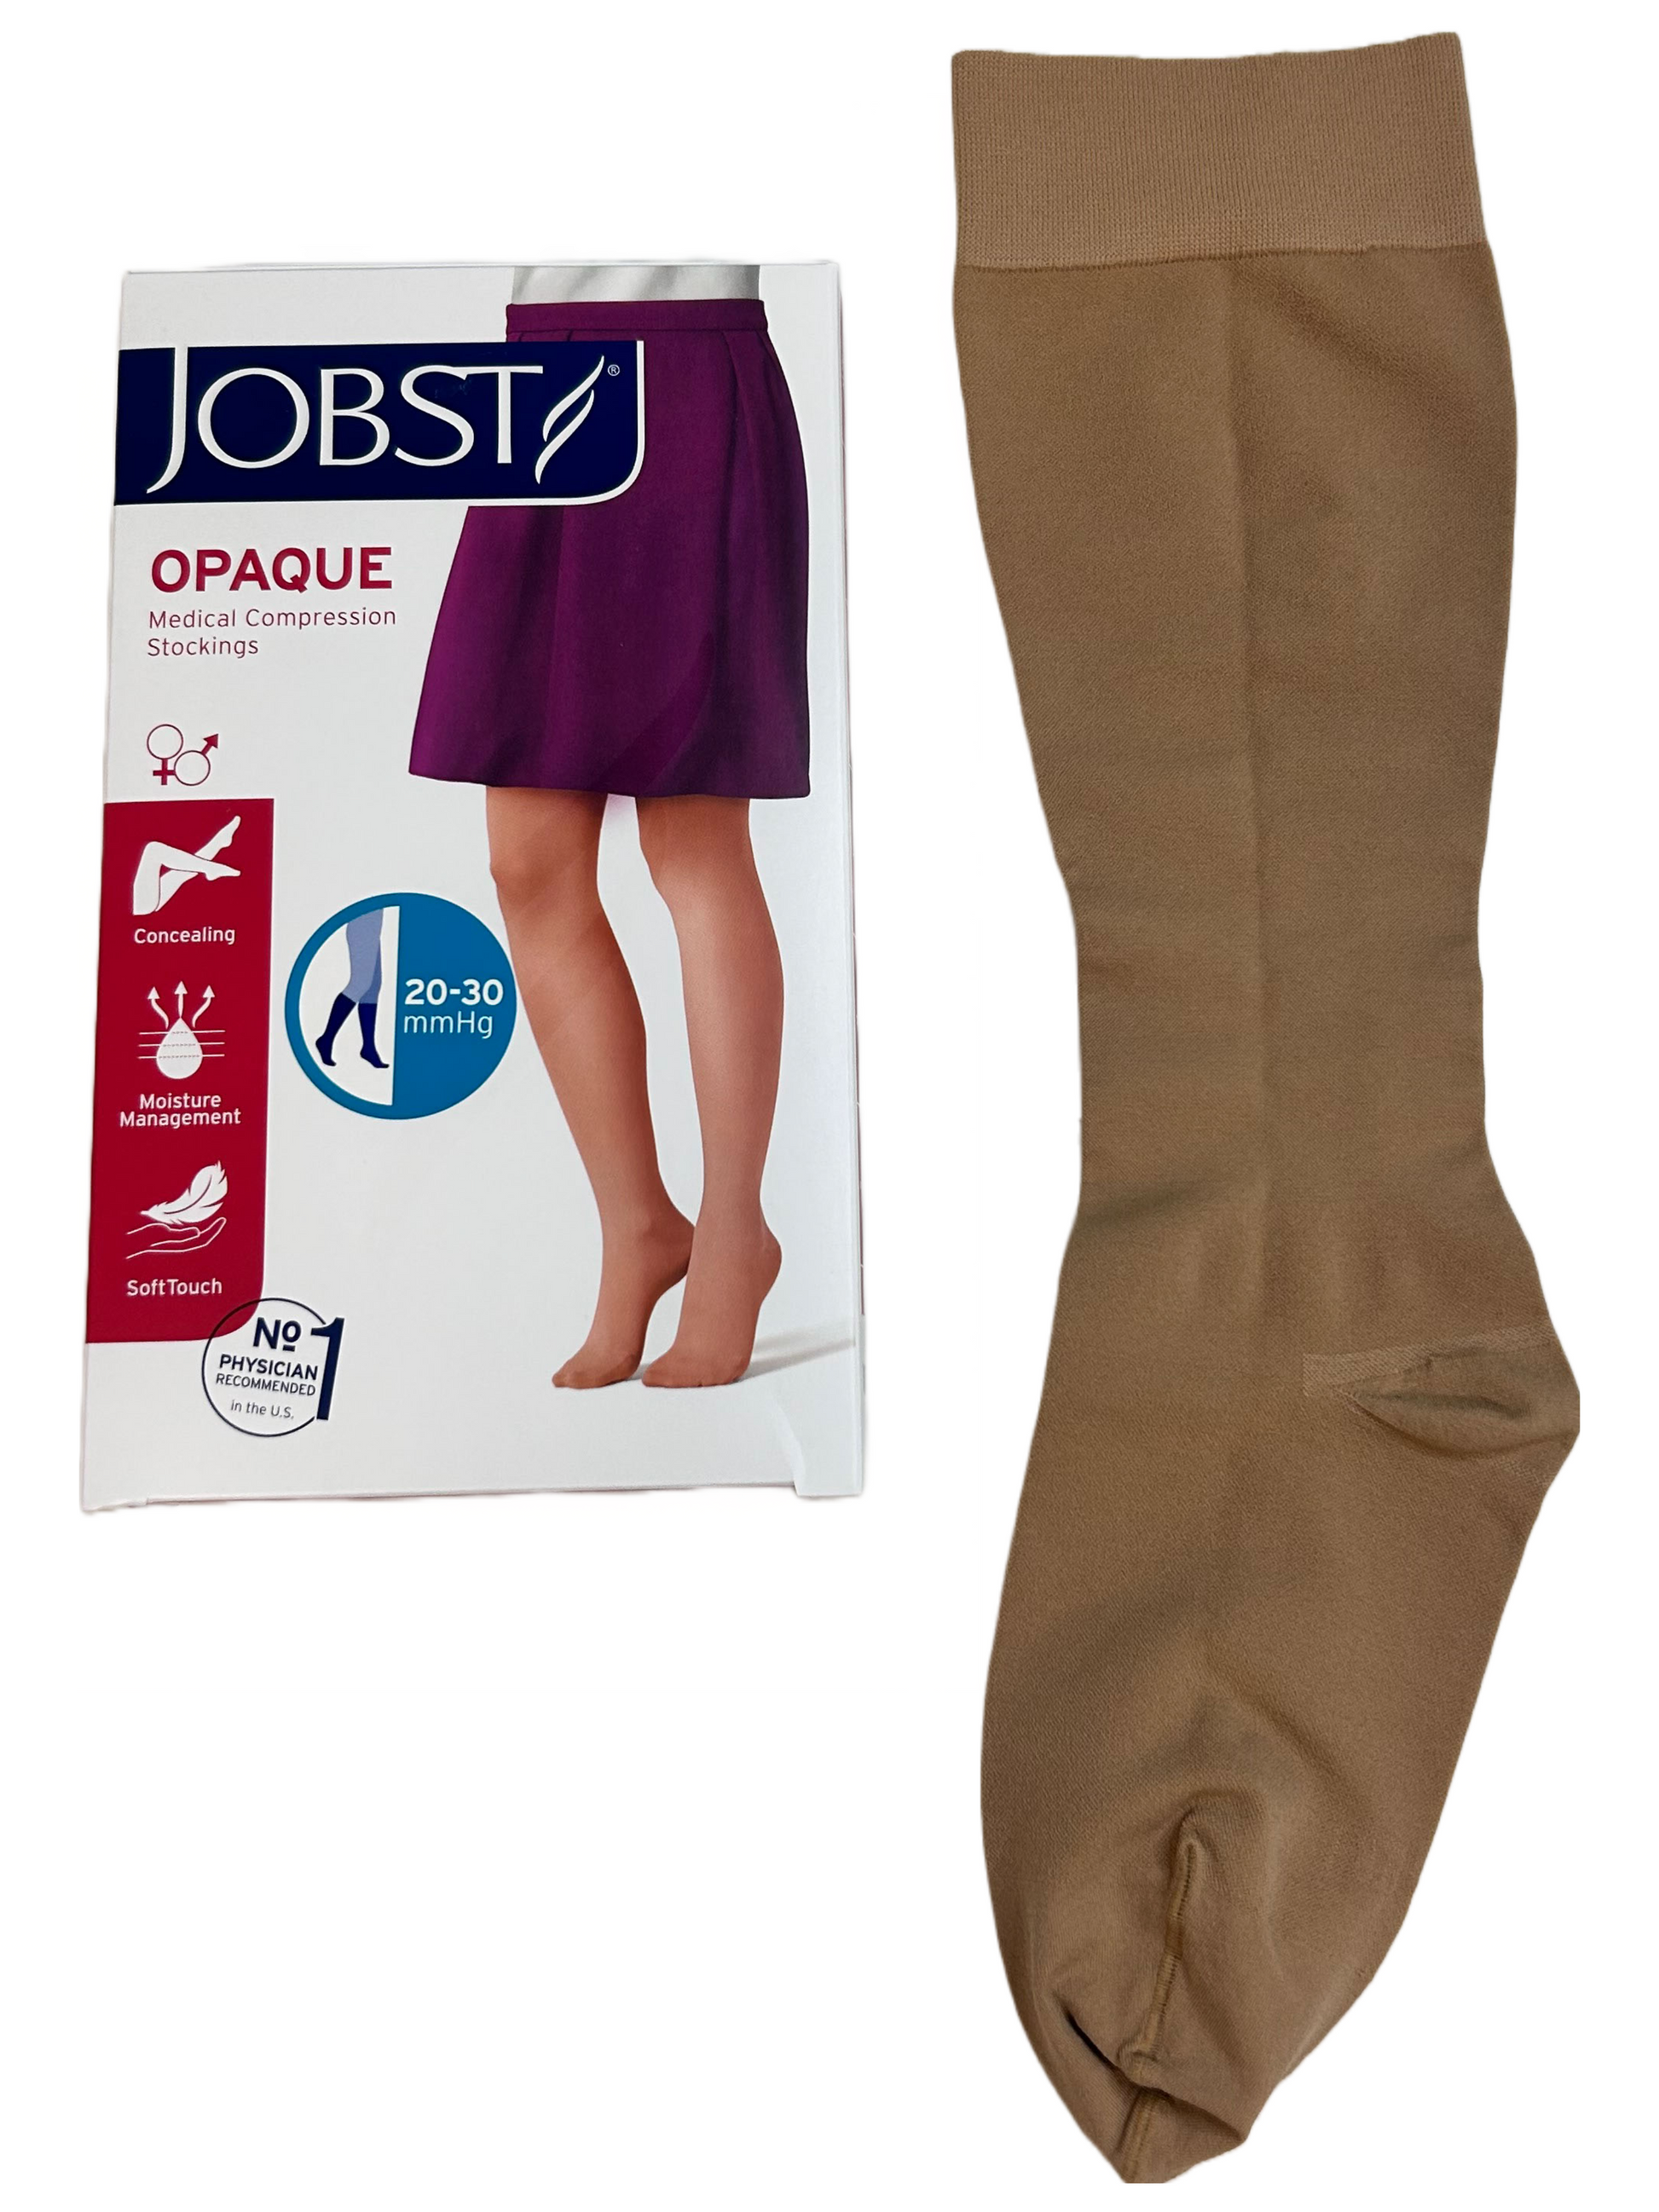 JOBST® Opaque Thigh High Compression Stockings – Vascular Store